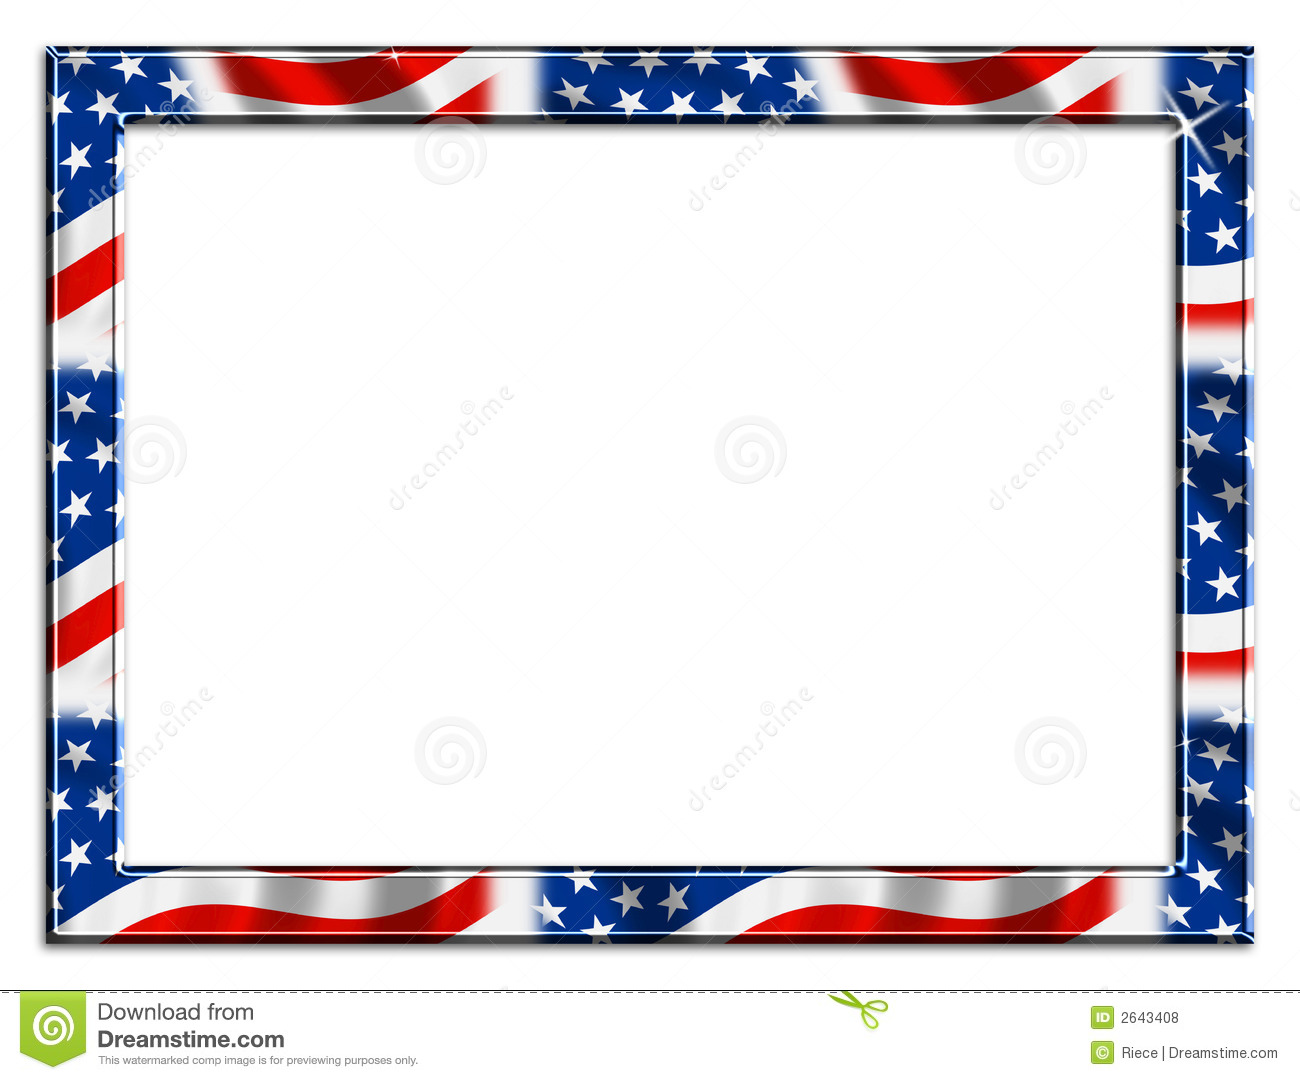 Patriotic Borders and Frames